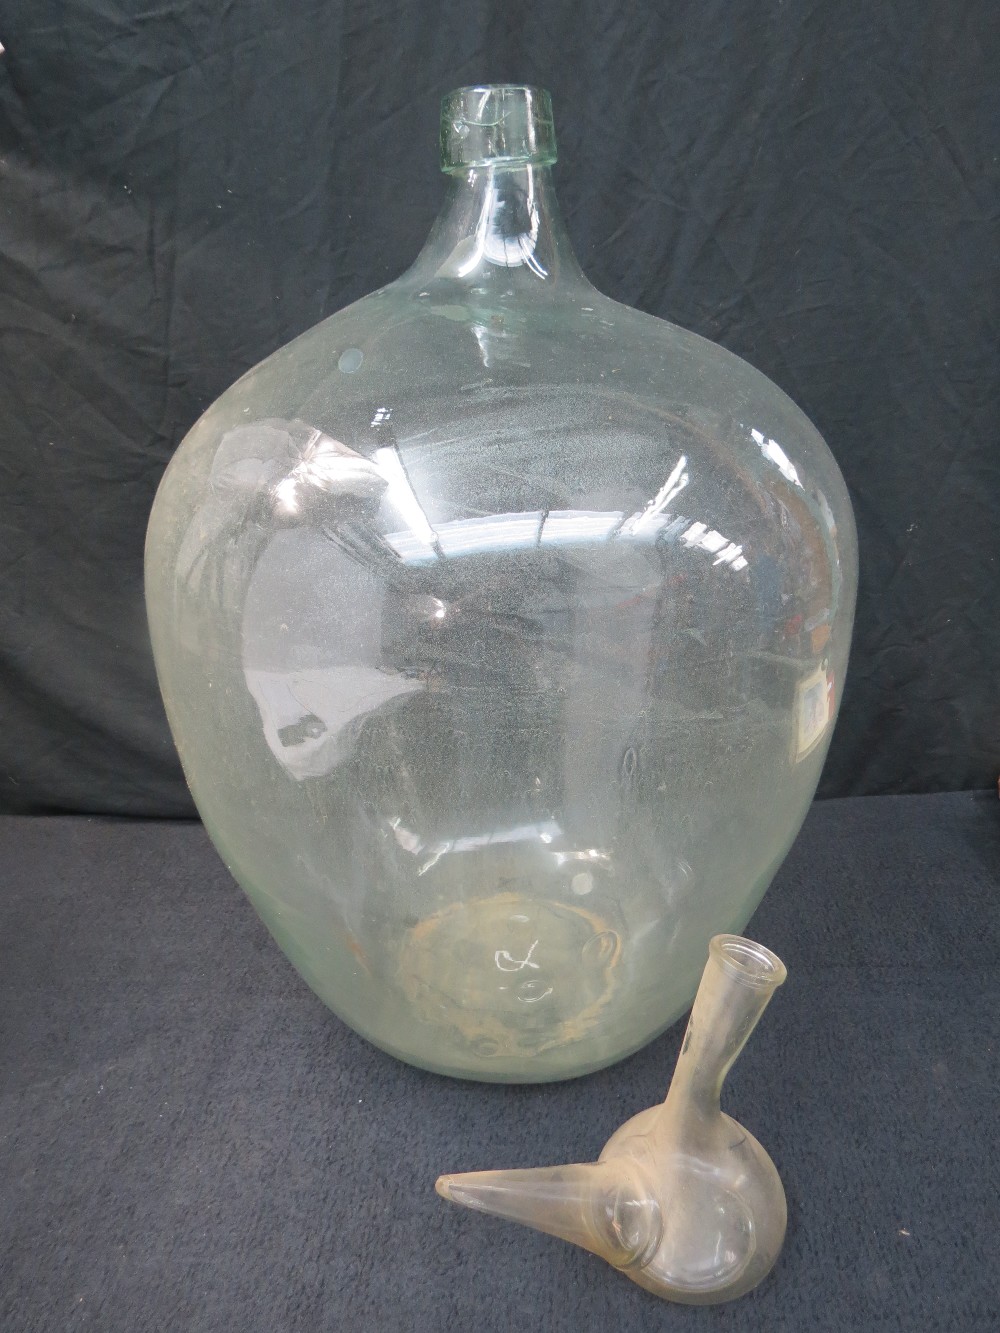 A very large clear glass jar, 63m high, diameter 40cm approximately also a Spanish wine dispenser.